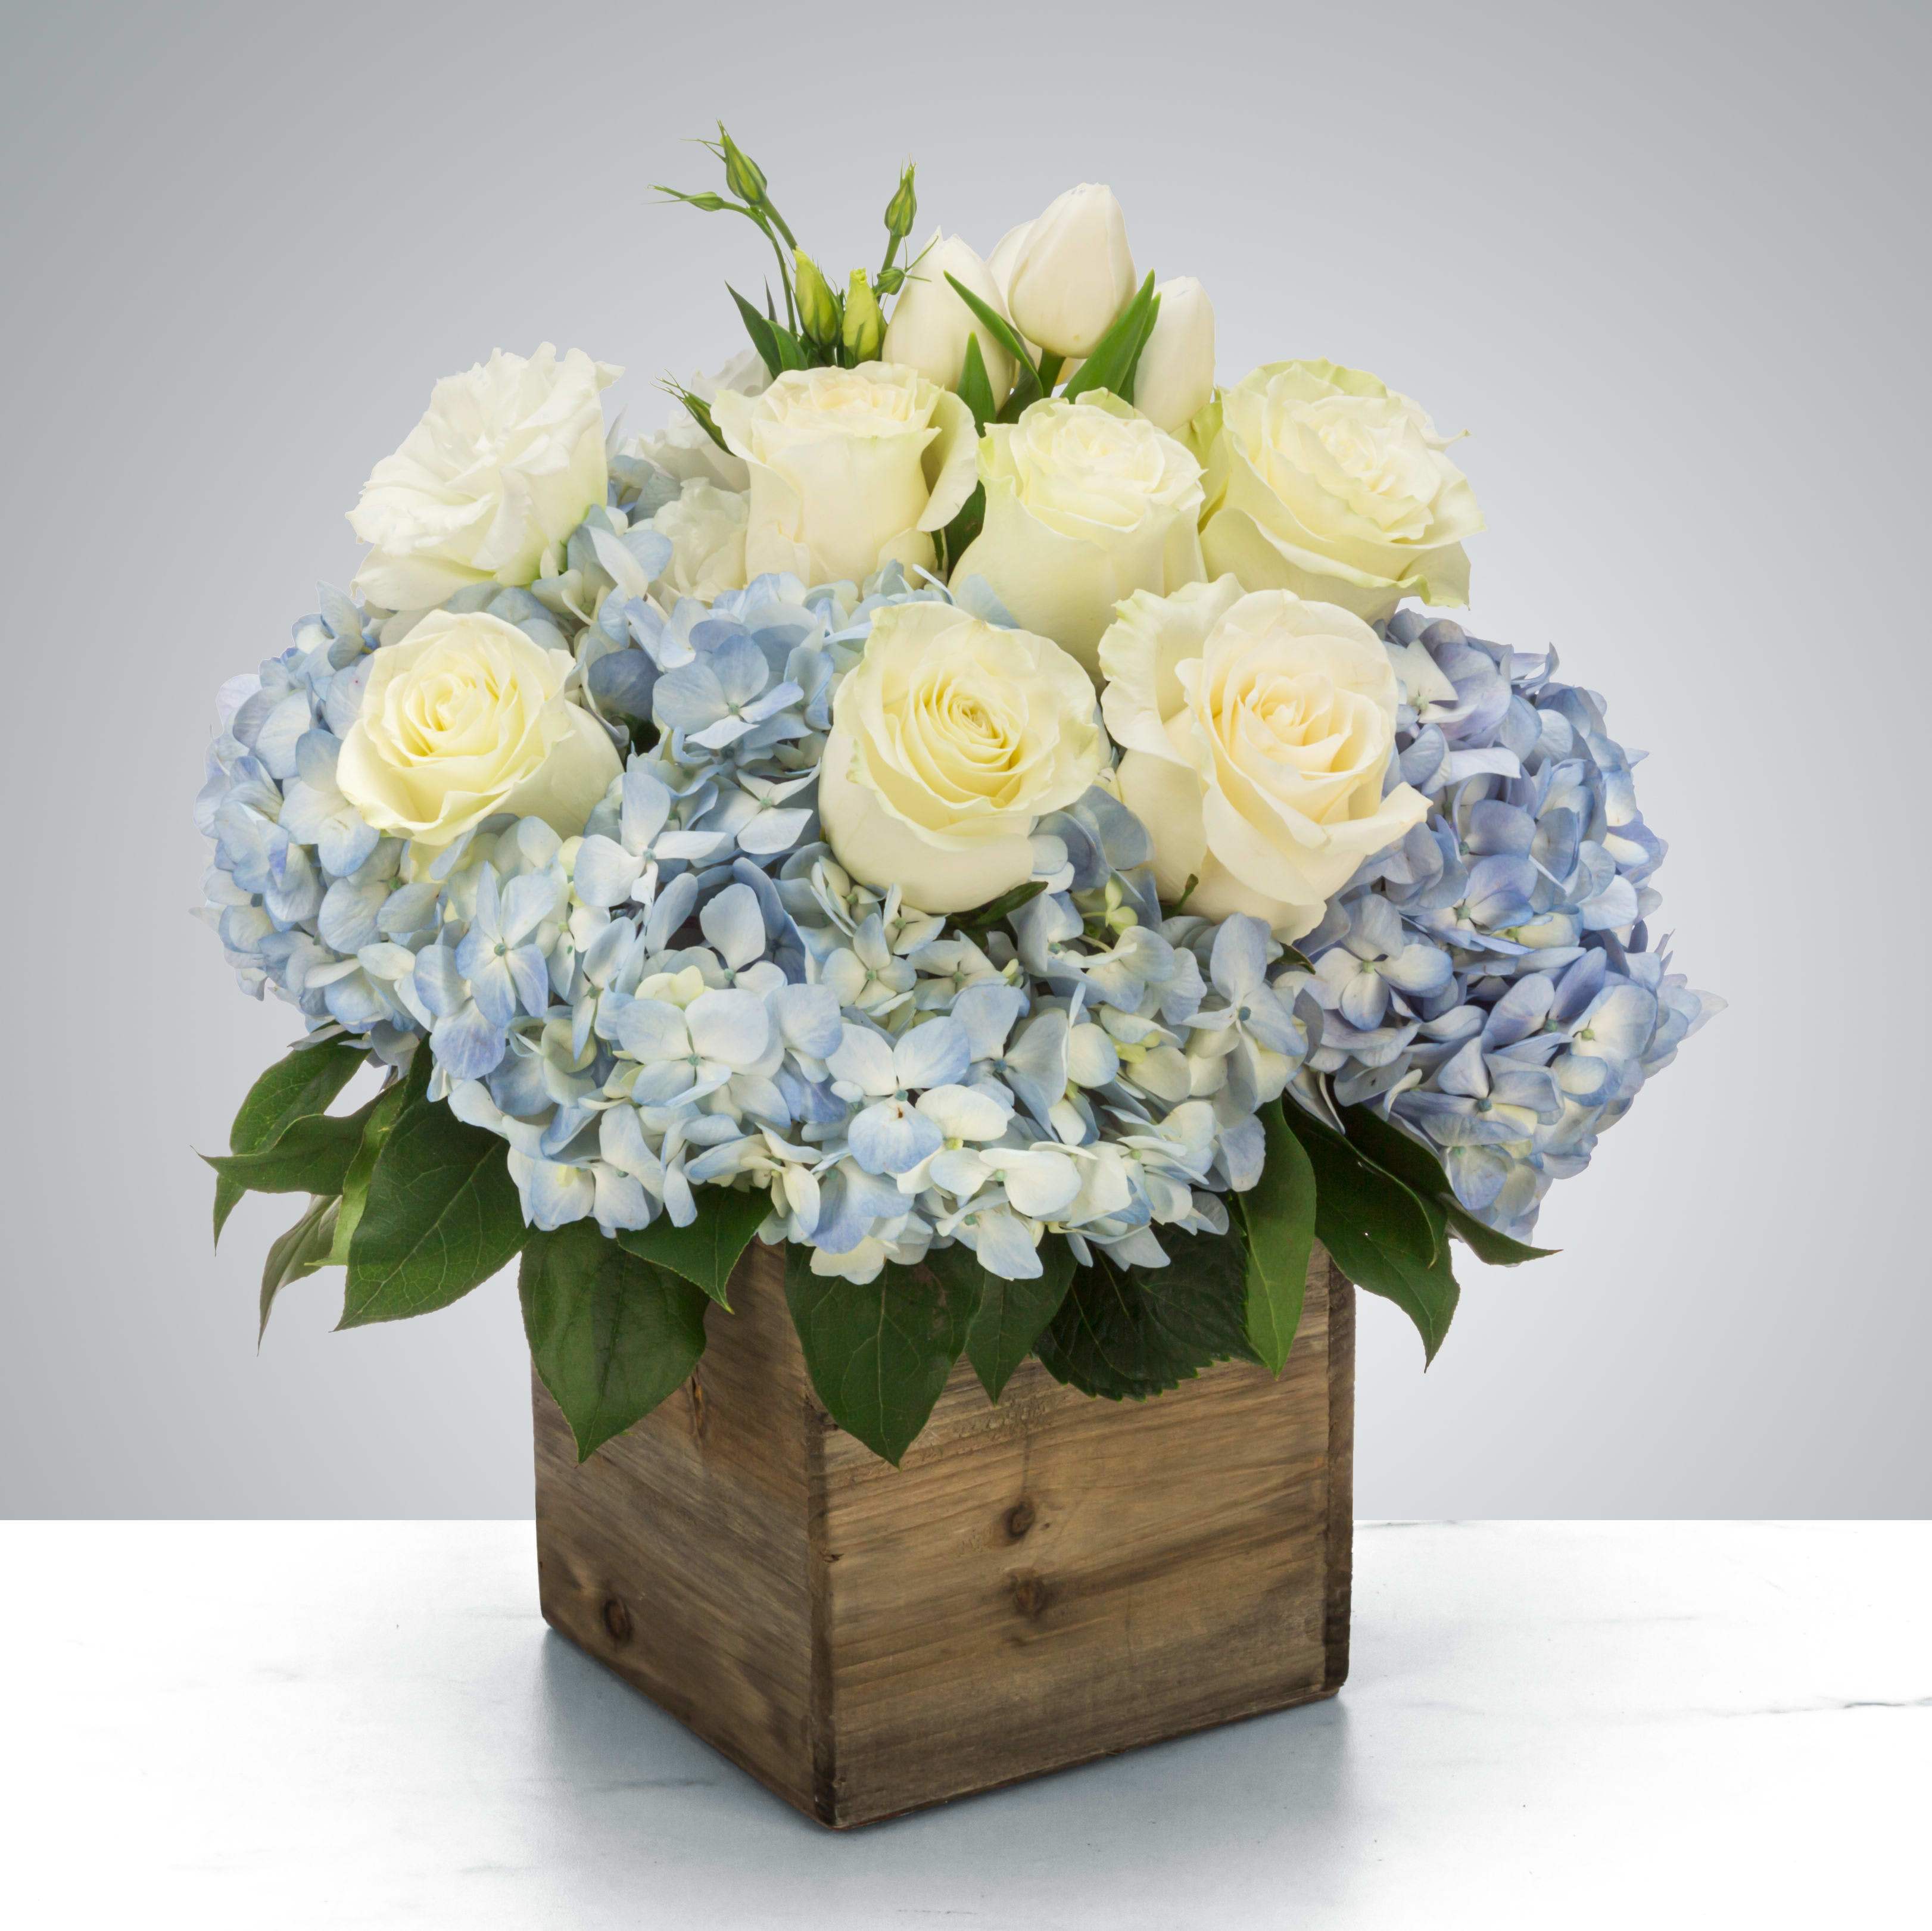 Sail Away - Send something to let them know you care. Featuring blue hydrangea, white tulips, and white roses this arrangement is a nice way to show you are thinking of somebody in their time of need.  Approximate Dimensions: 12&quot;D x 14&quot;H